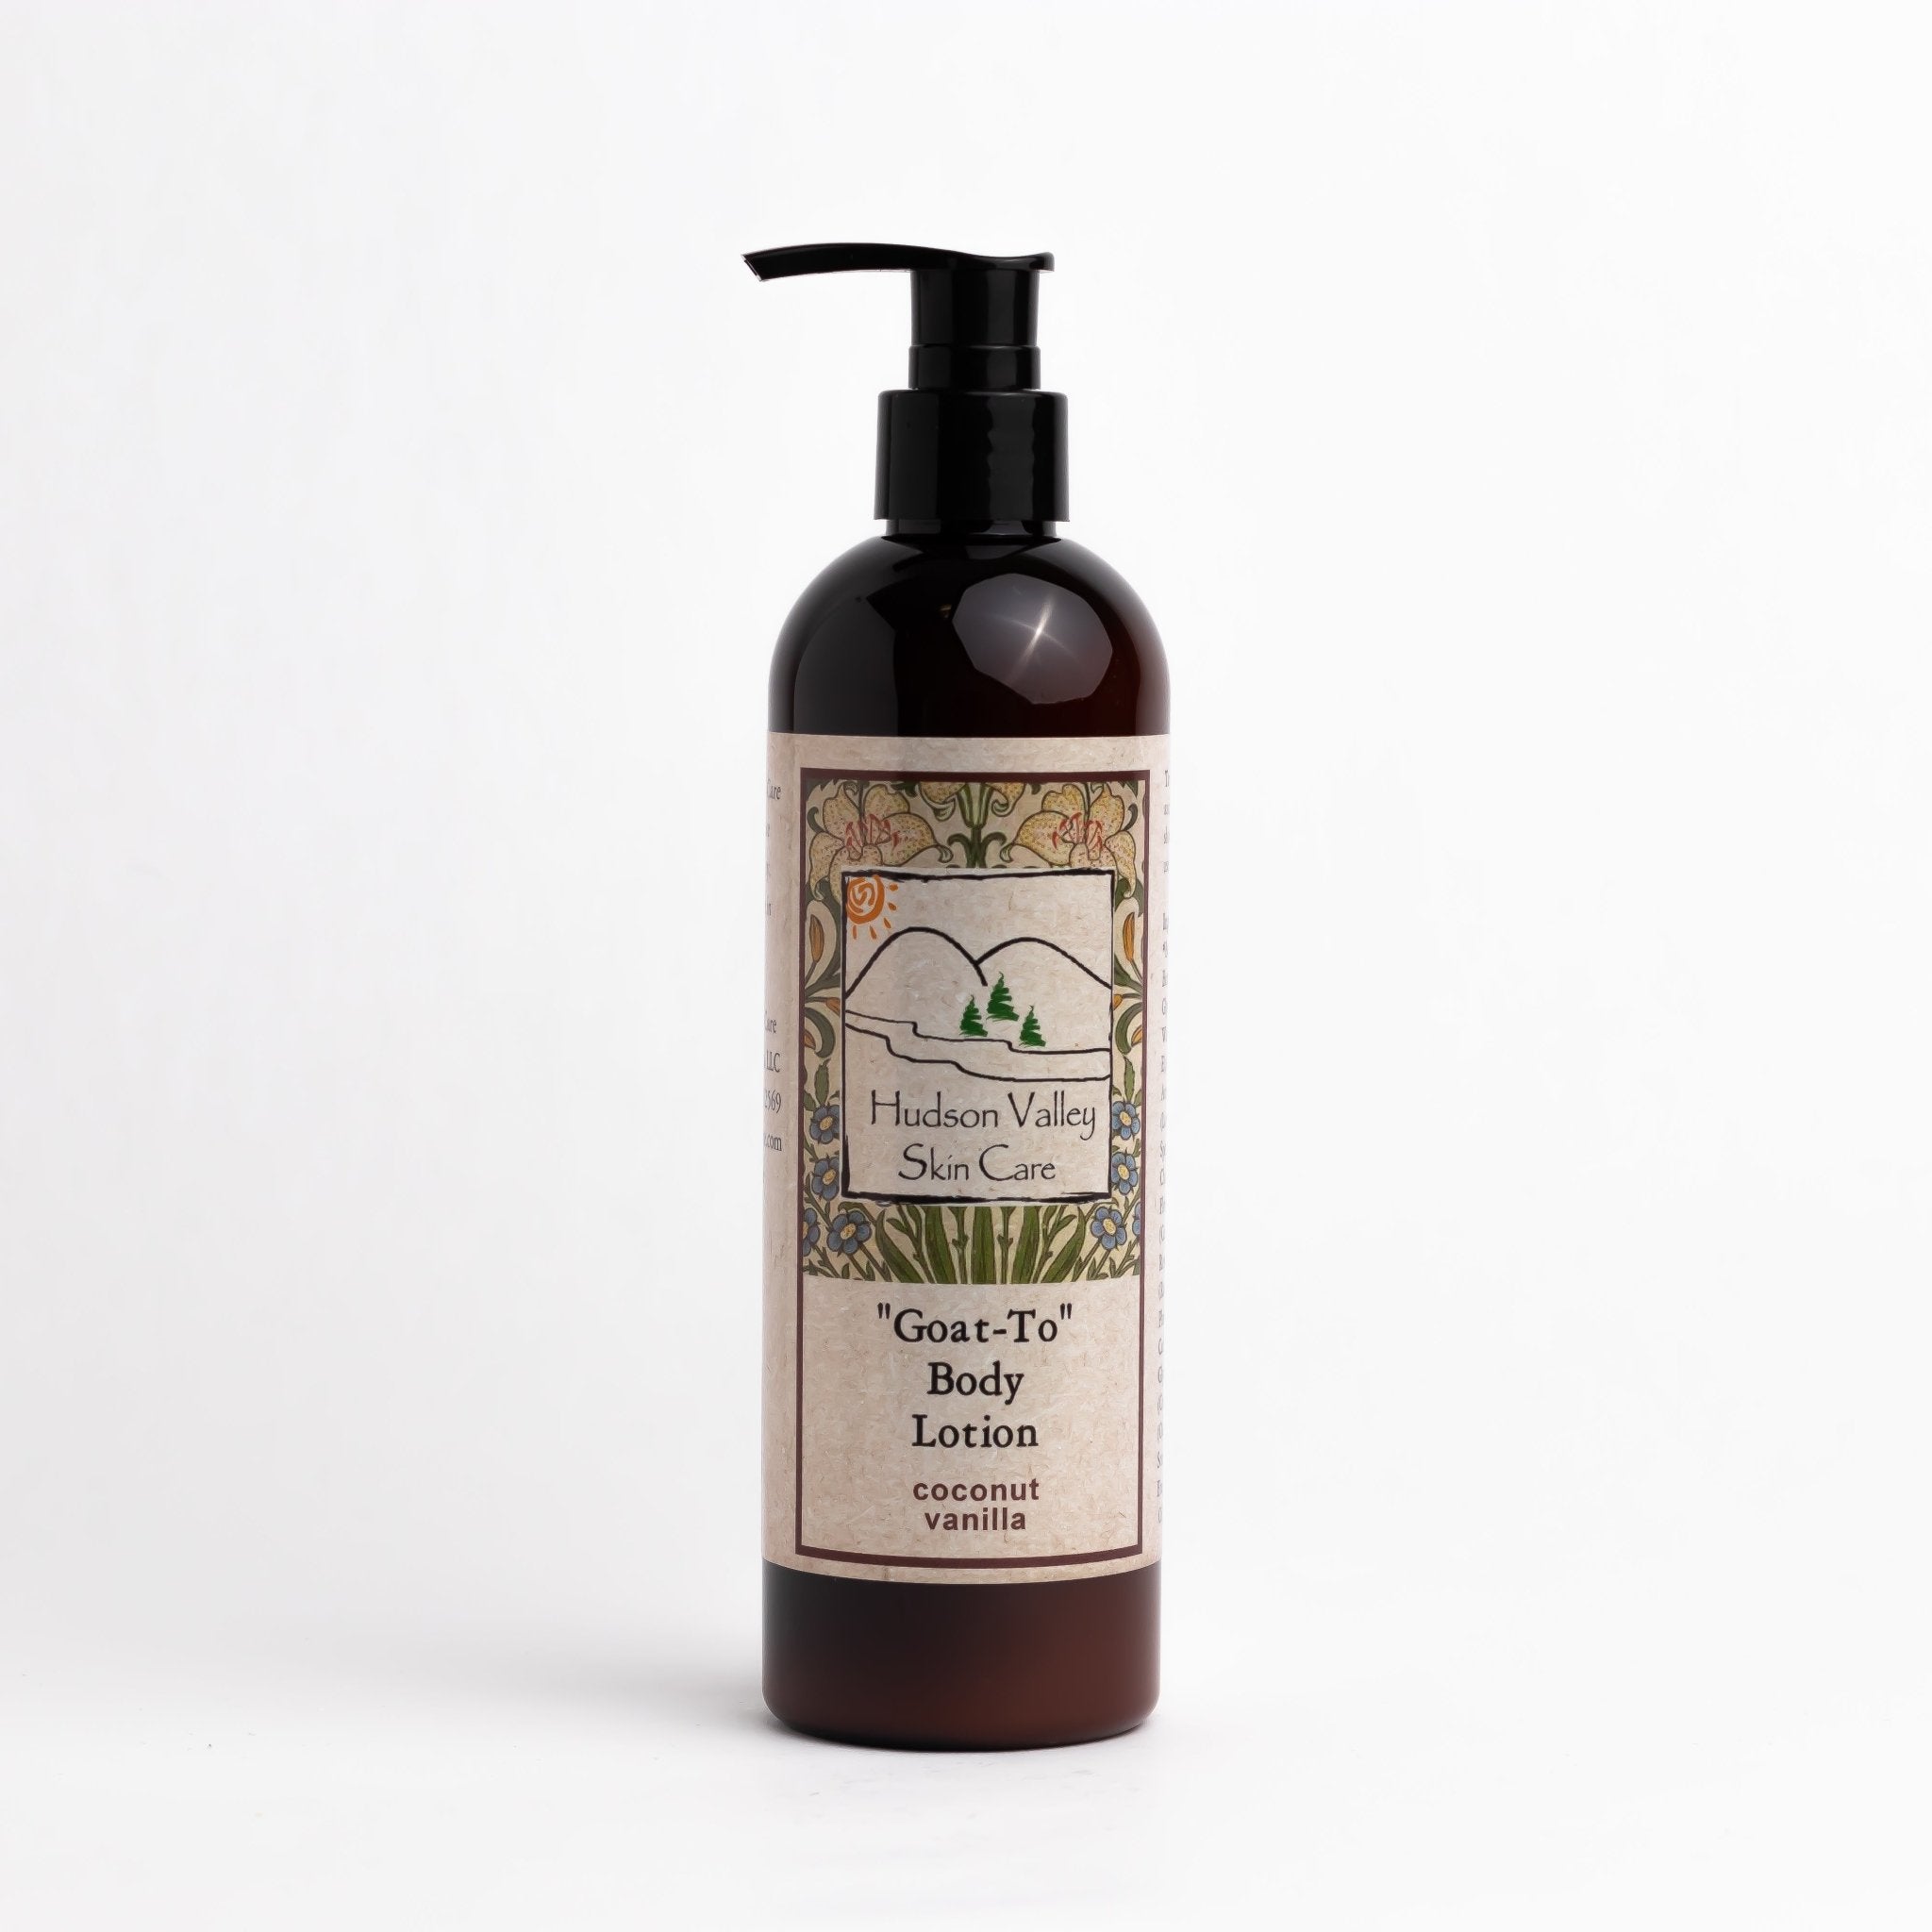 Coconut Vanilla Goat-To Body Lotion - Hudson Valley Skin Care